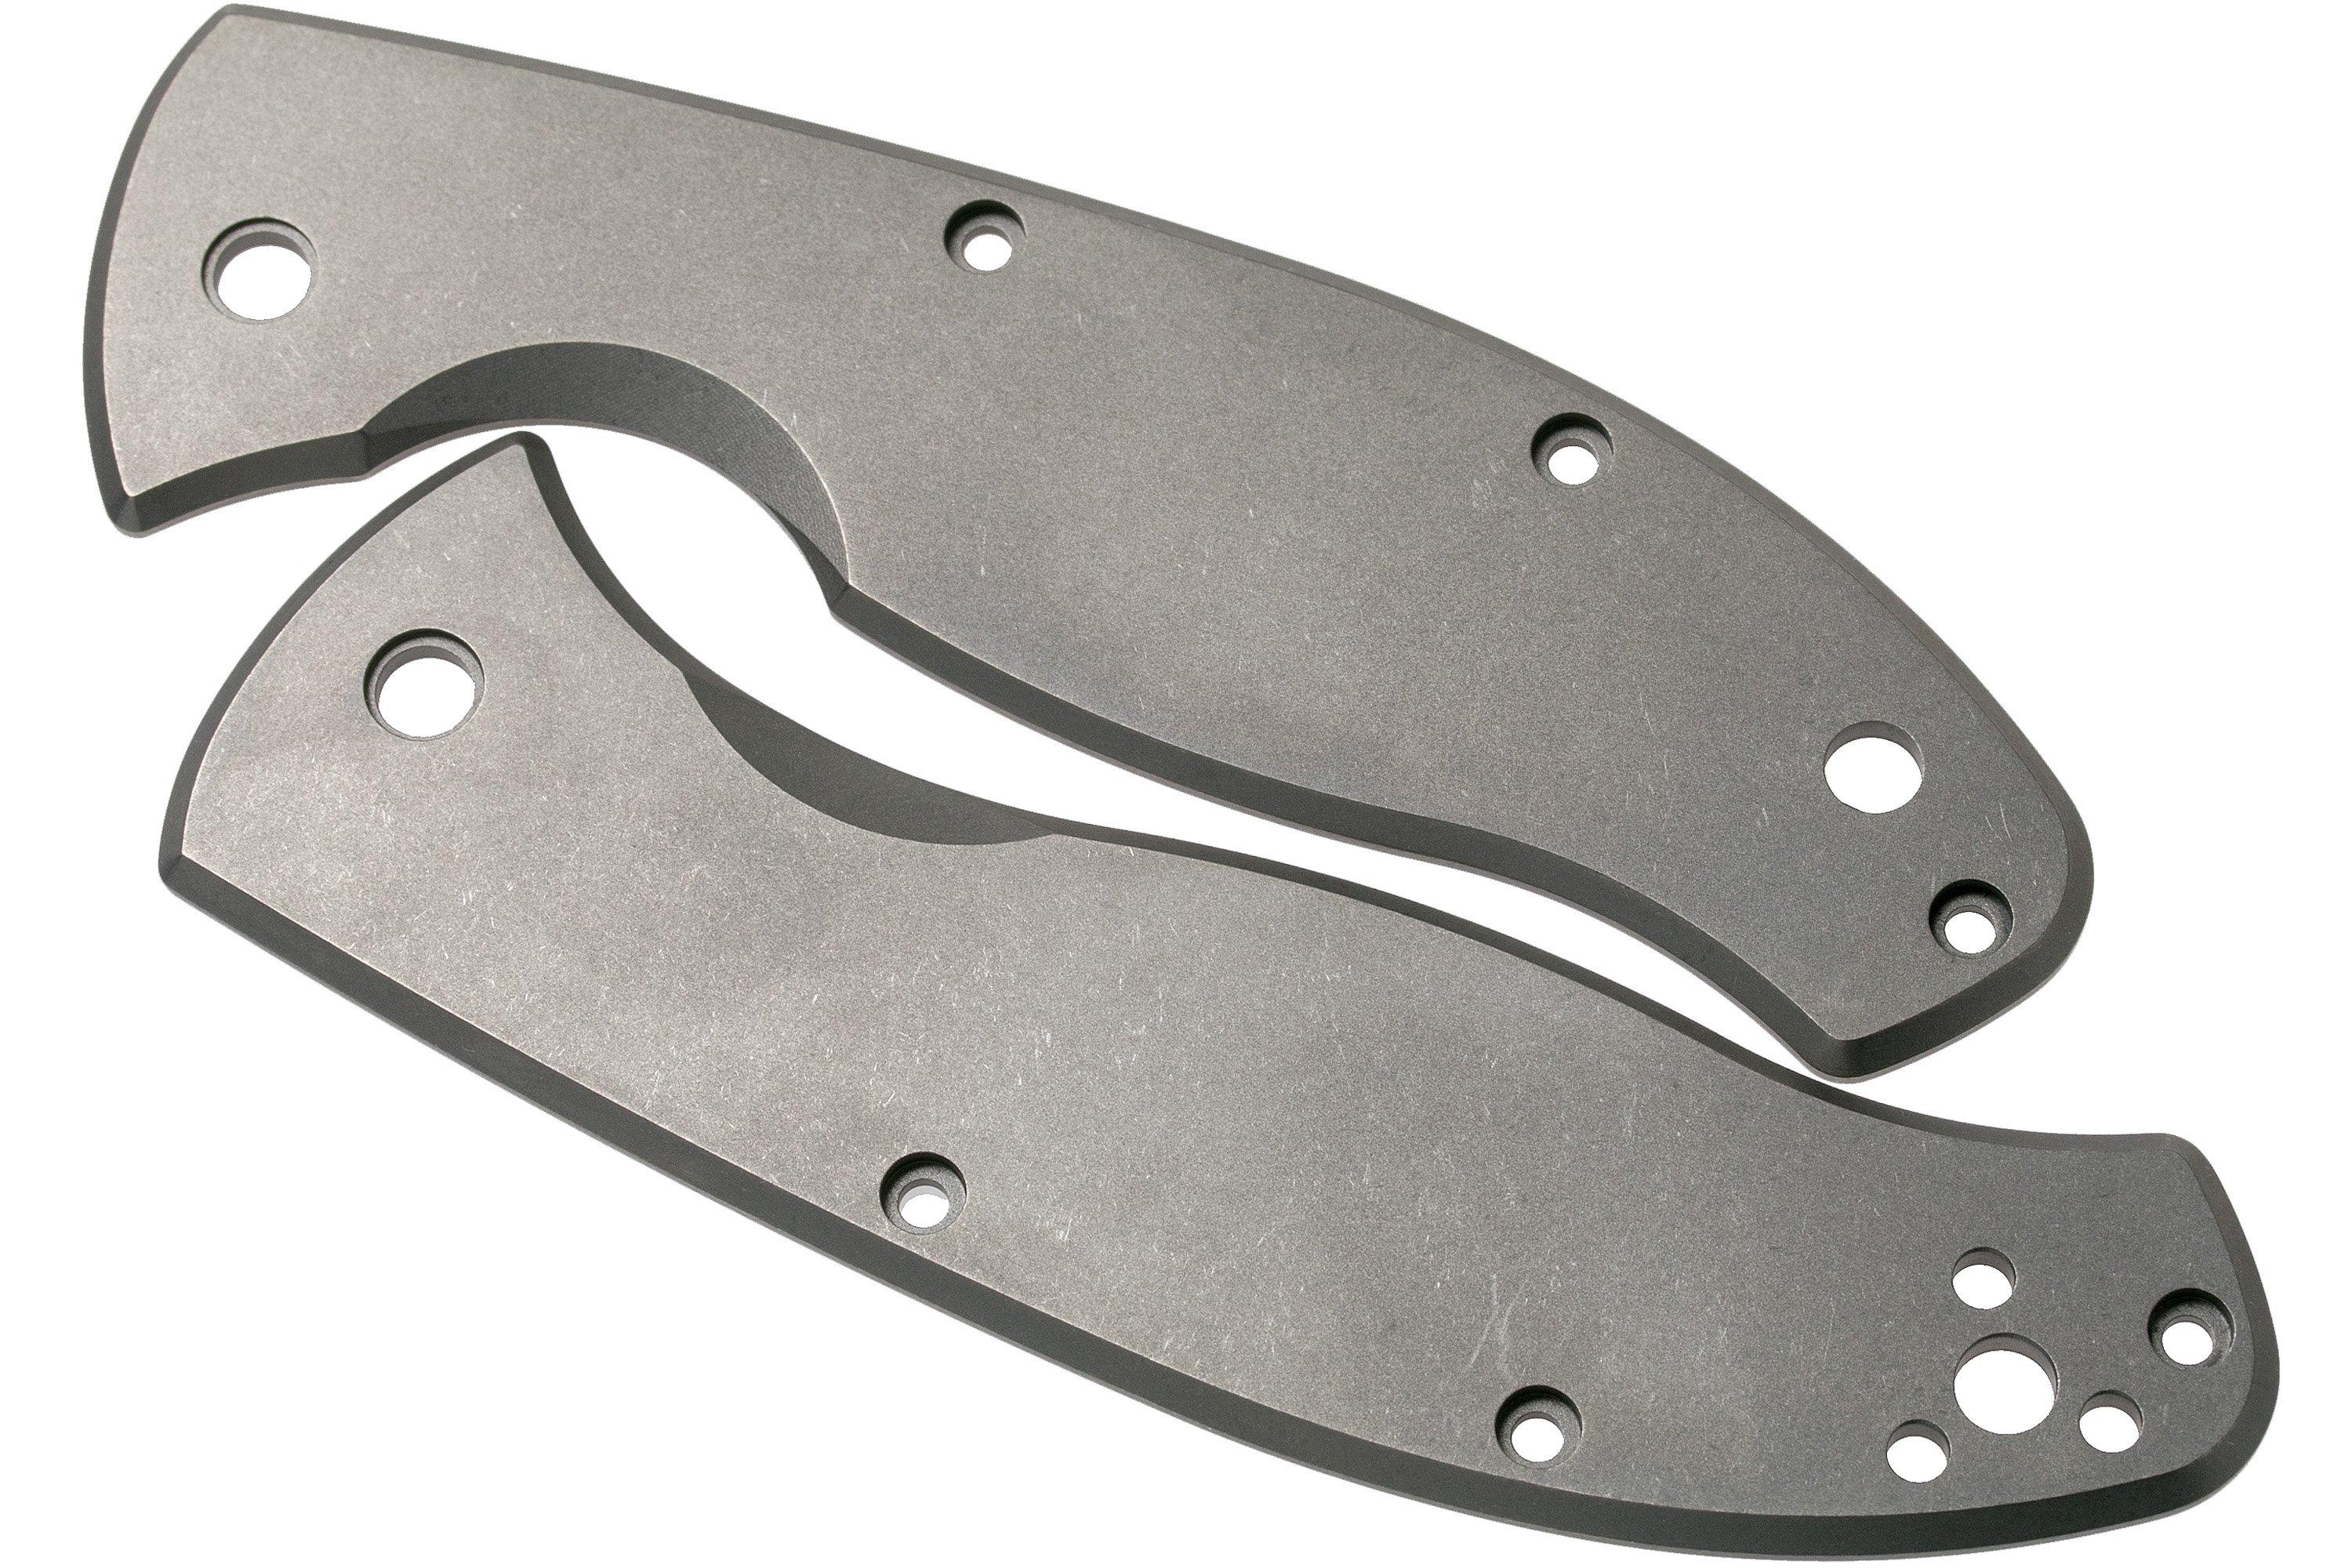 Flytanium Titanium Scales for Spyderco Tenacious FLY0285 Scales Only 